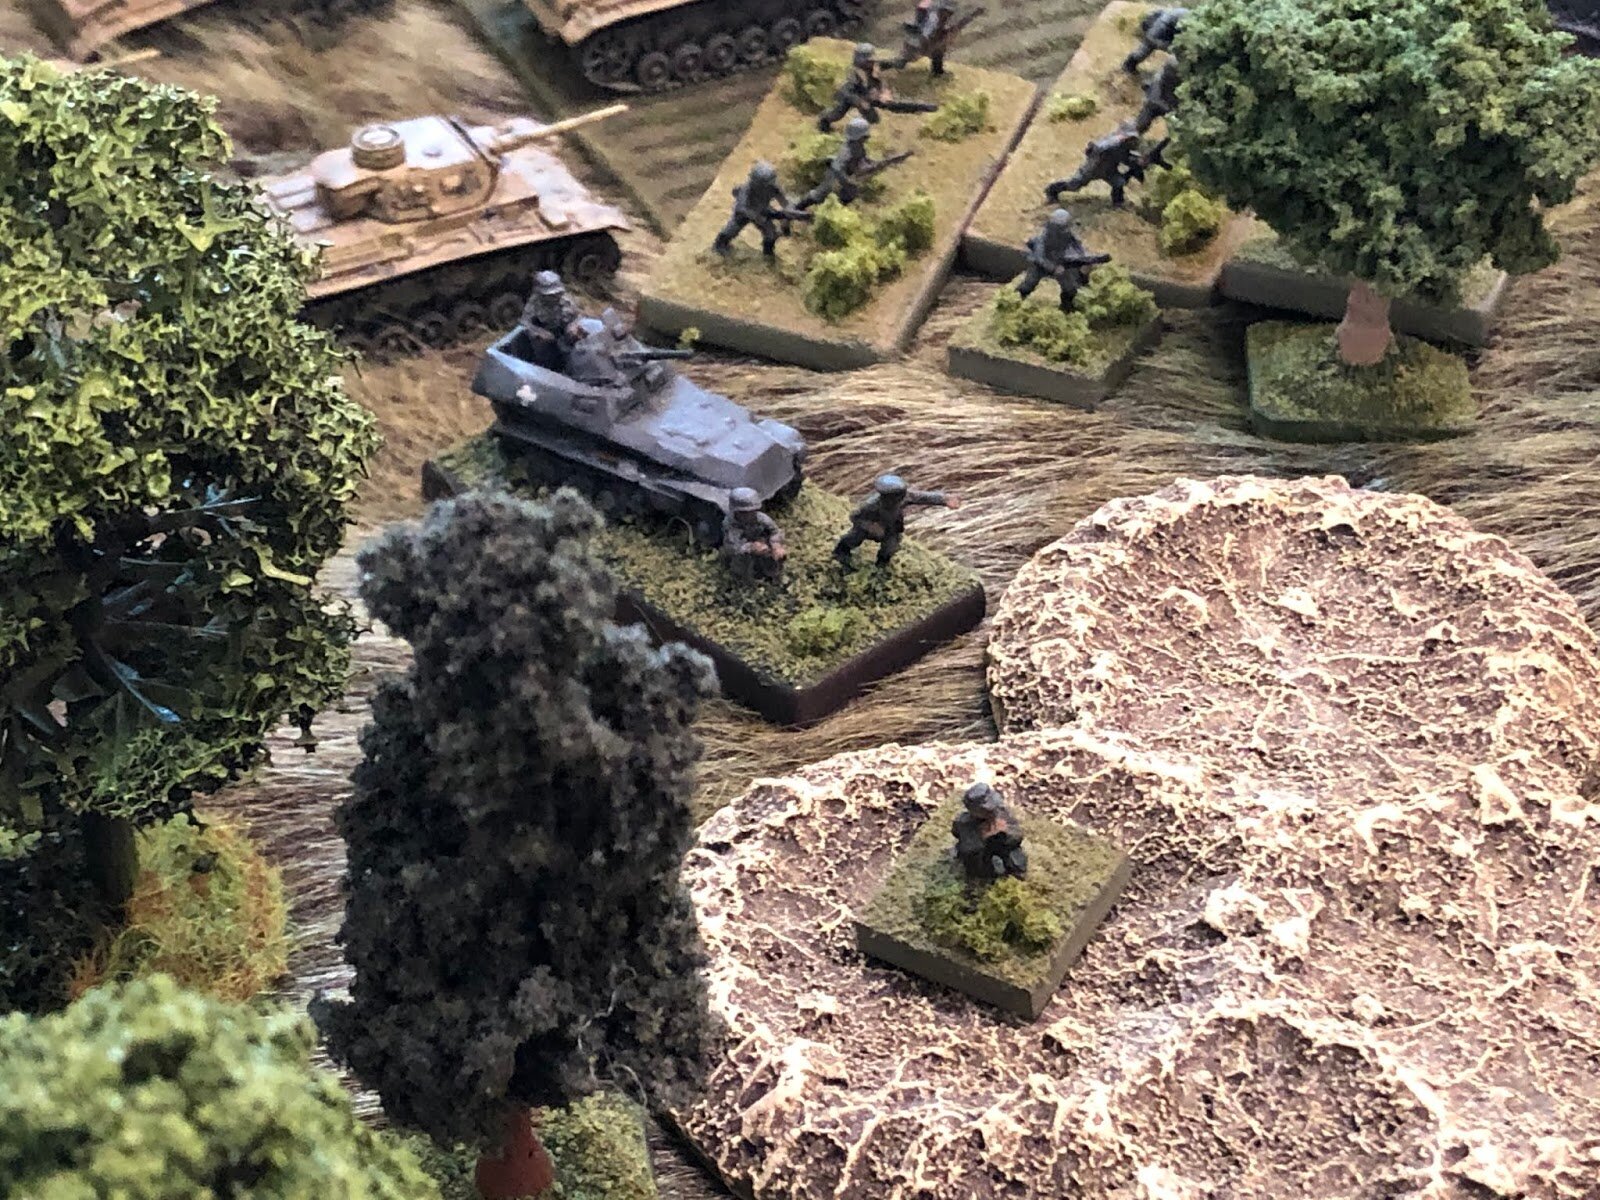  The German commander fires a green flare from his Very Pistol, signaling the start of the attack, with his Mortar Platoon commander in front of him in the craters, tanks and riflemen of 2nd Company behind him. 